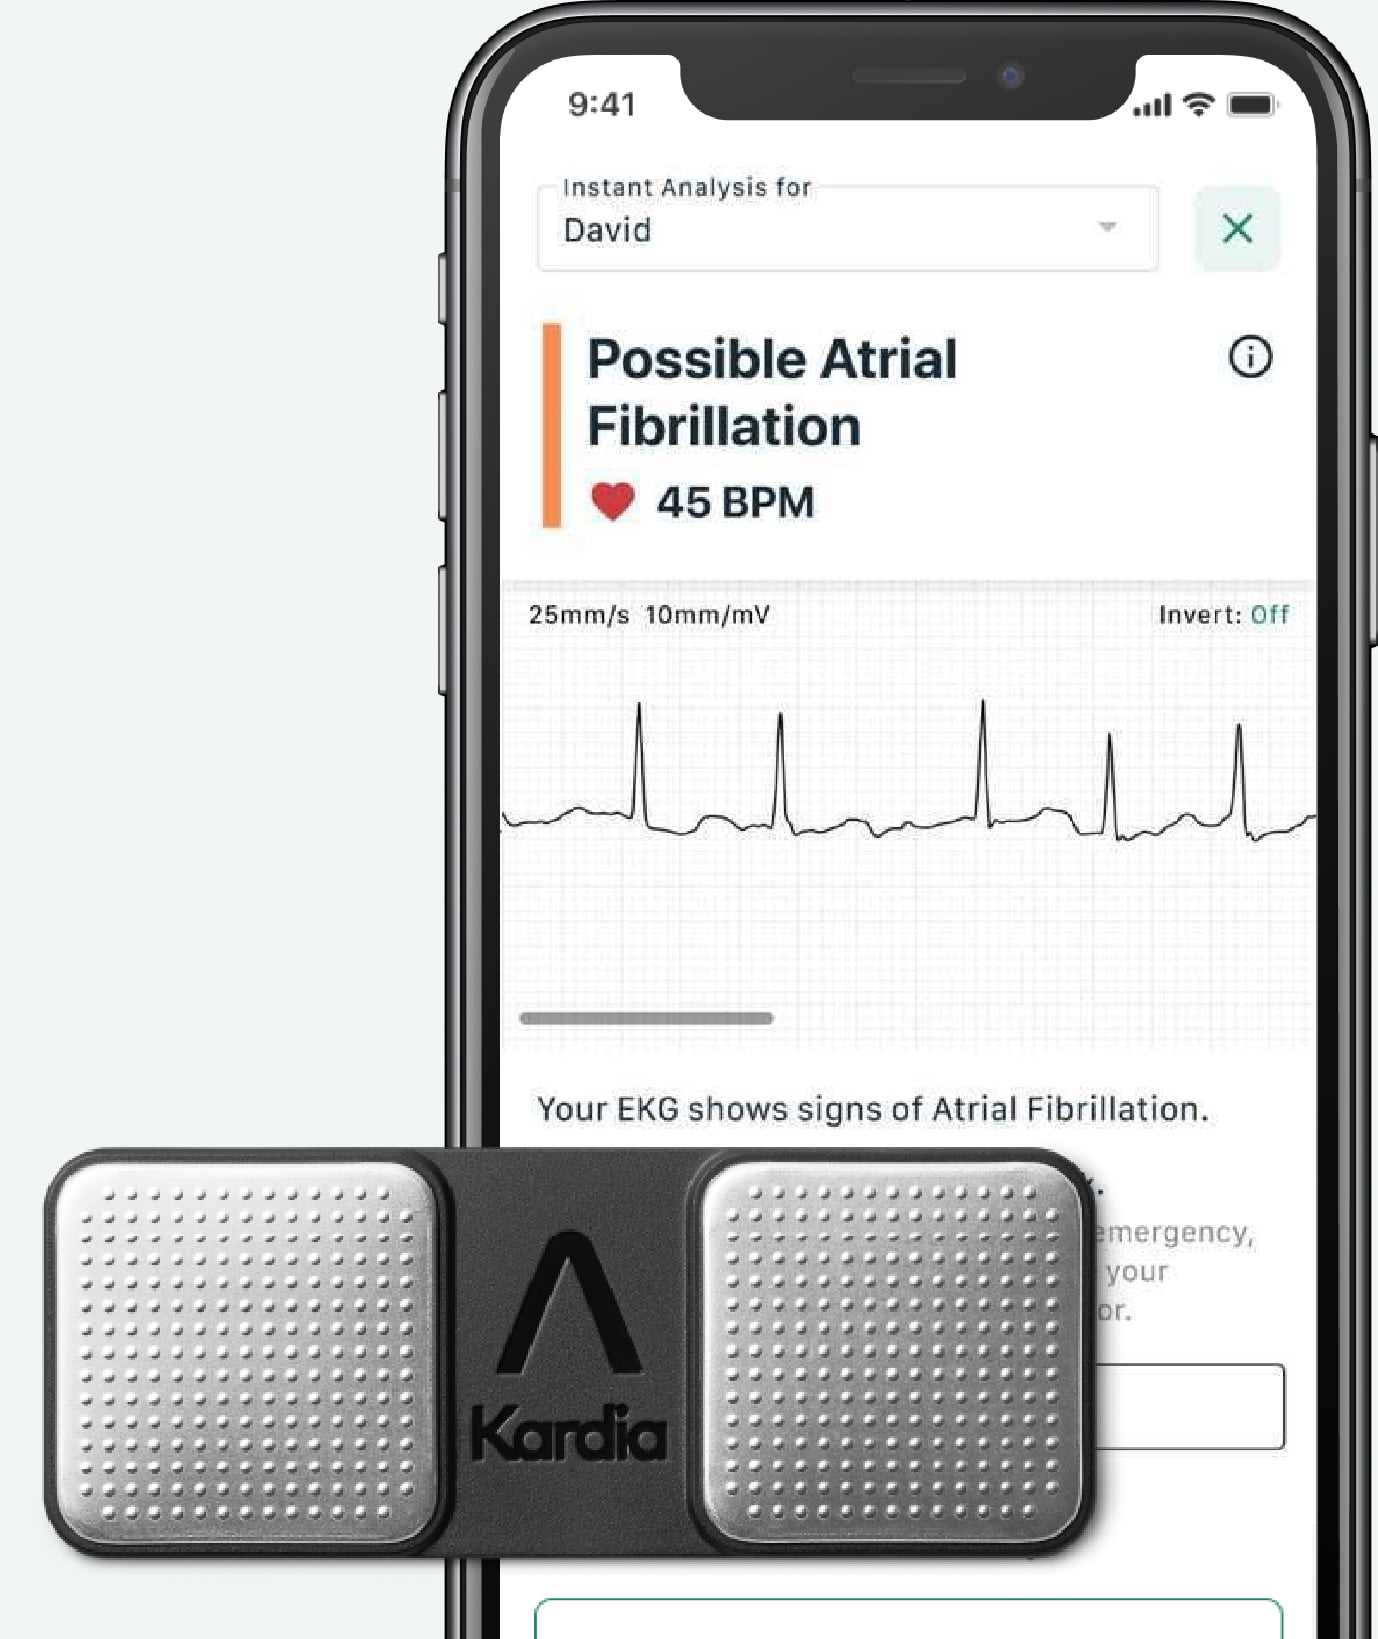 Kardia Instant Analysis screen showing Possible Atrial Fibrillation with a KardiaMobile